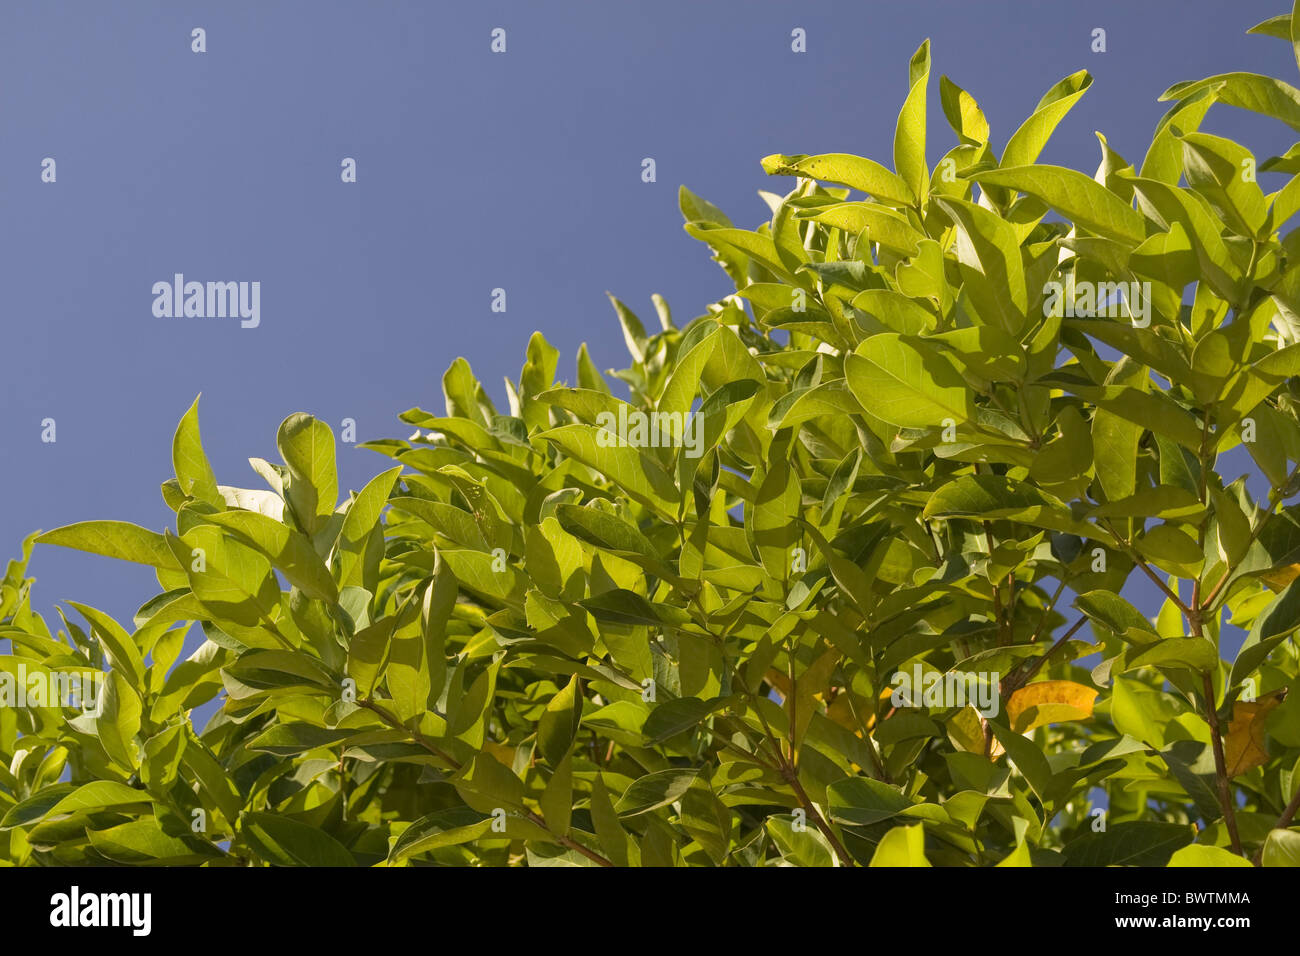 Asia Asian Southeast Asia Syzygium javanicum Miq. Eugenia javanica Lam Tree Trees Crop Crops Cropping Red Leaf Leaves Blue sky Stock Photo